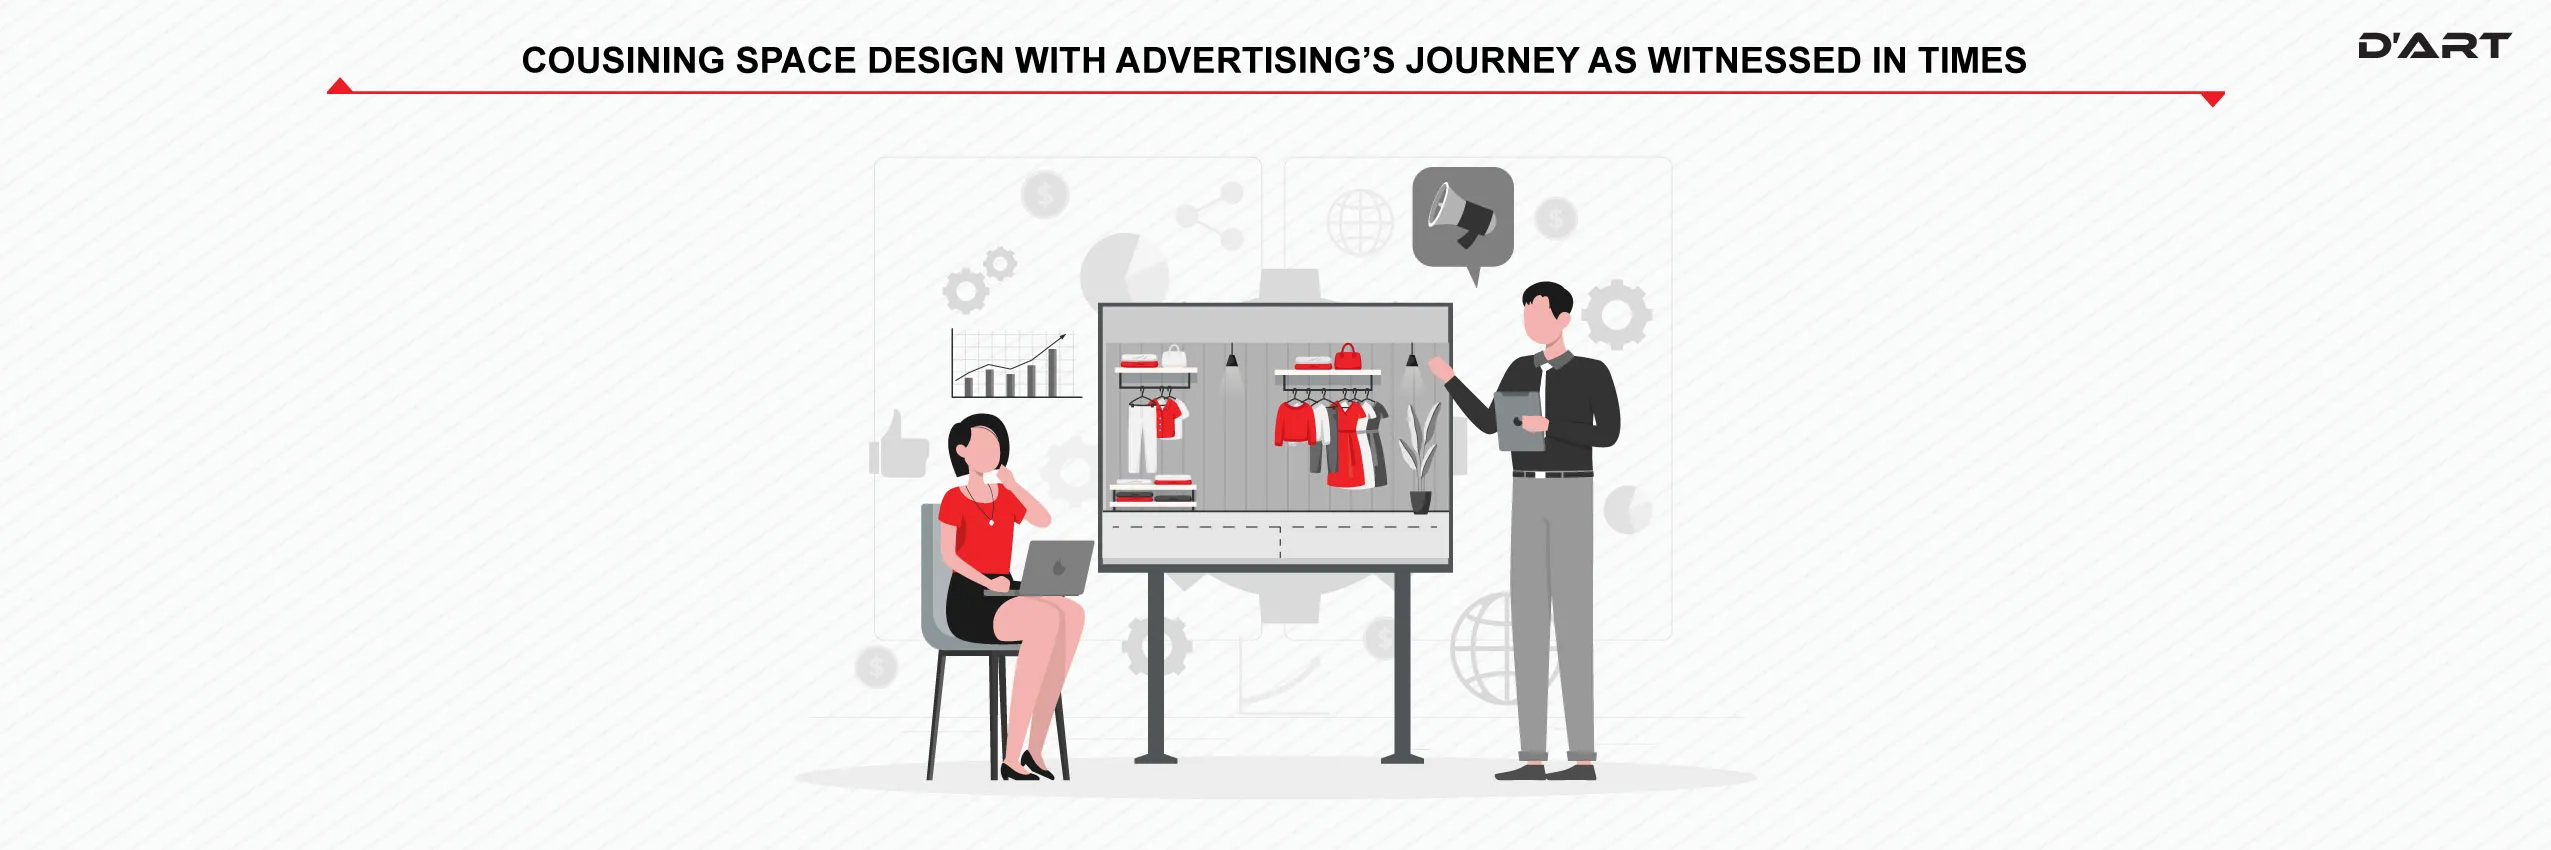 Cousining space design with advertising's journey as witnessed in times